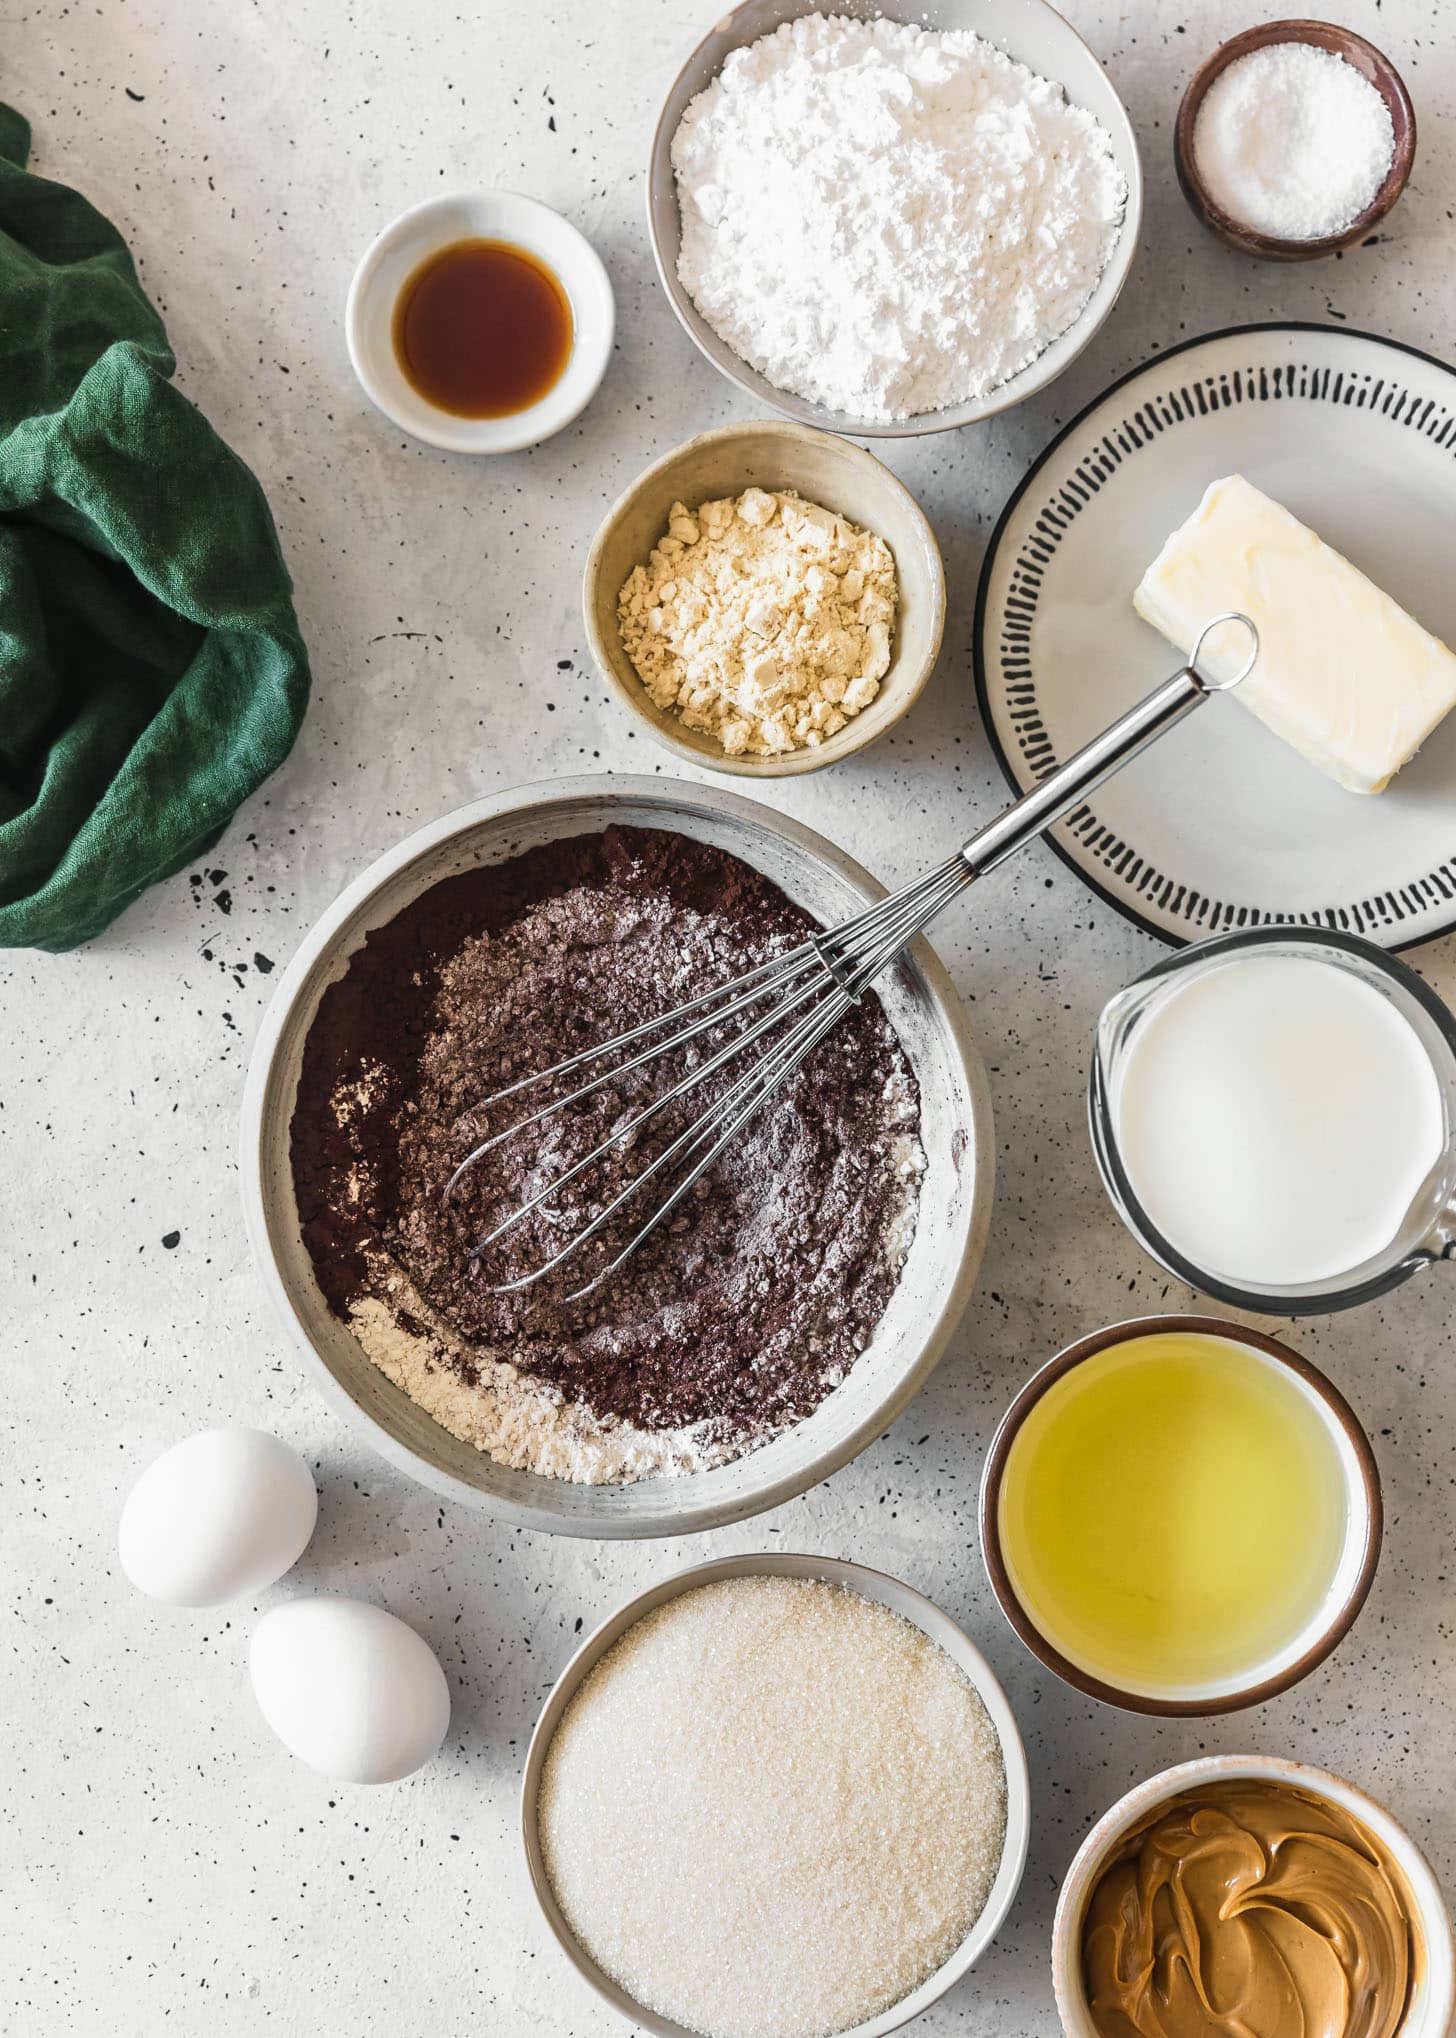 A grey bowl of flour and cocoa powder next to white bowls of sugar, nut butter, milk, milk powder, a green linen, and other baking ingredients on a white speckled background.